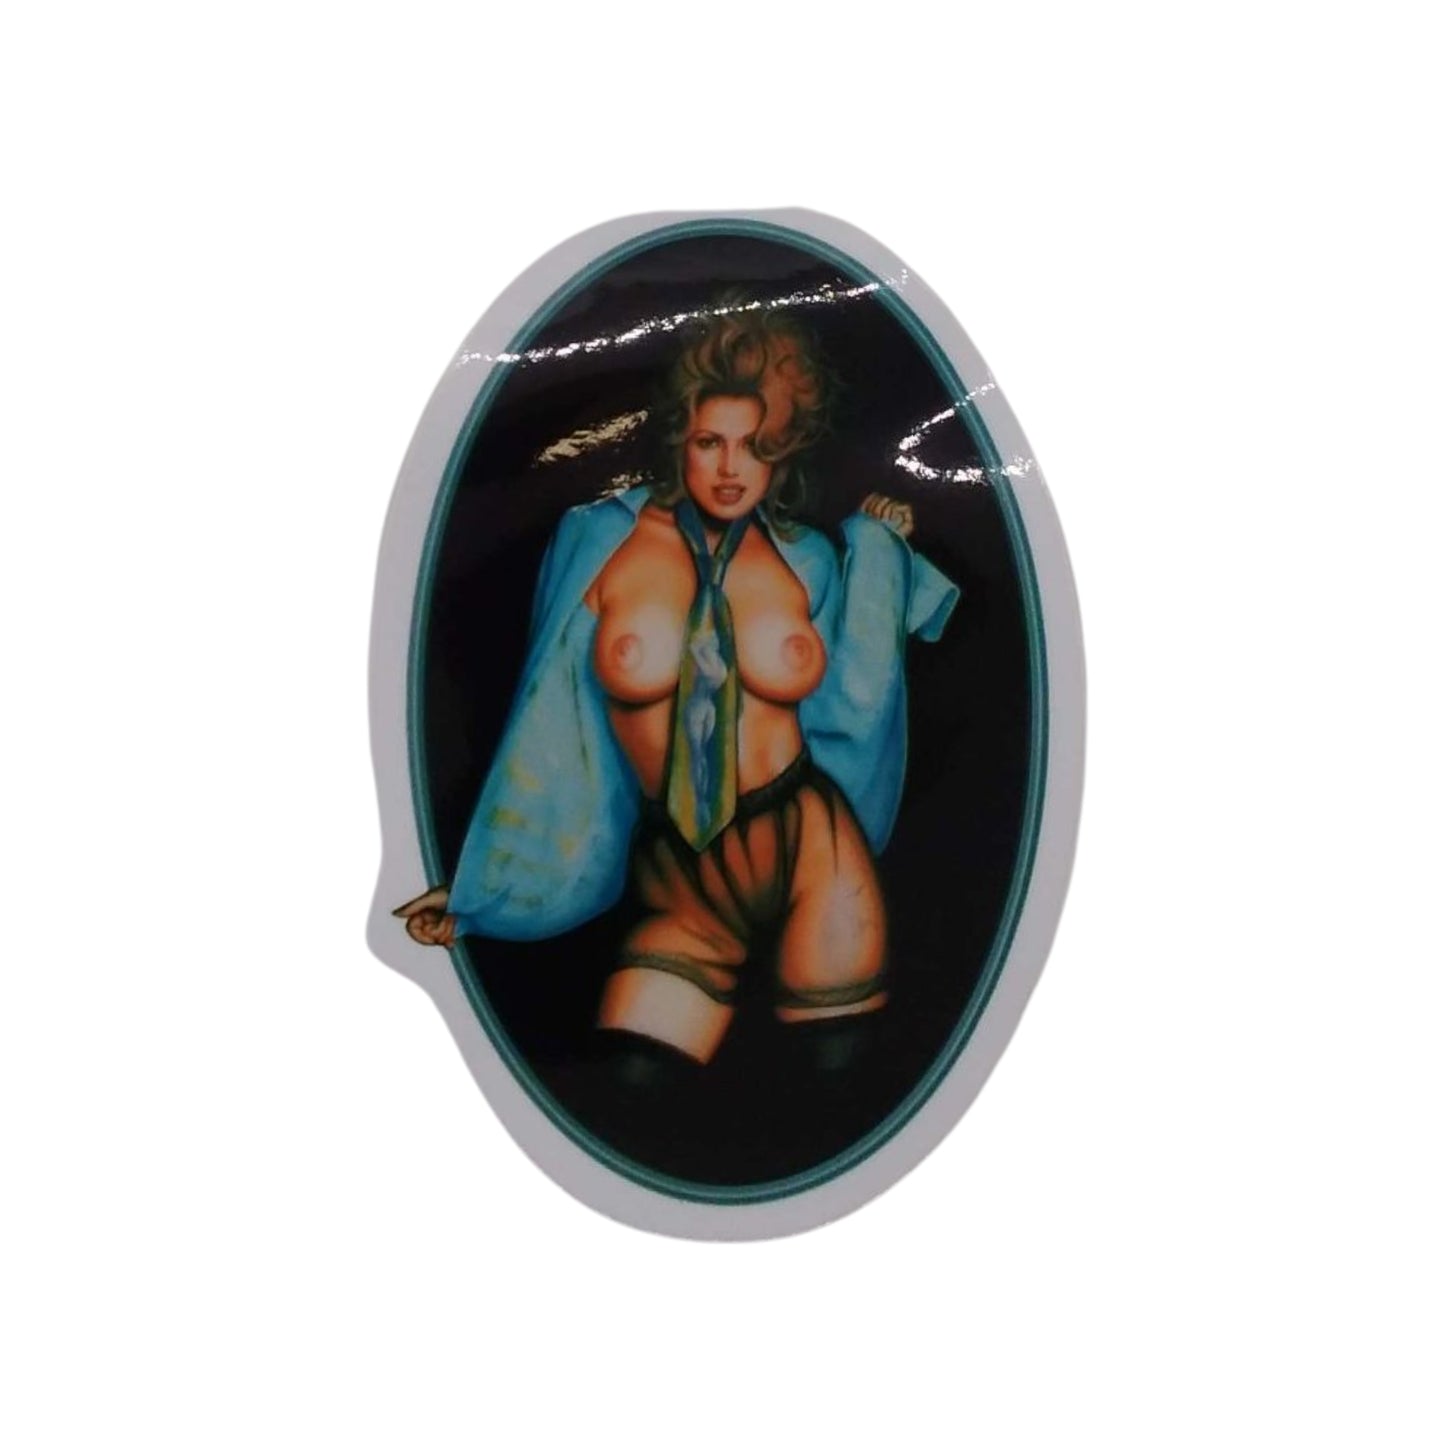 Woman Wearing Only Suit Jacket and Tie, Uncensored - Sticker